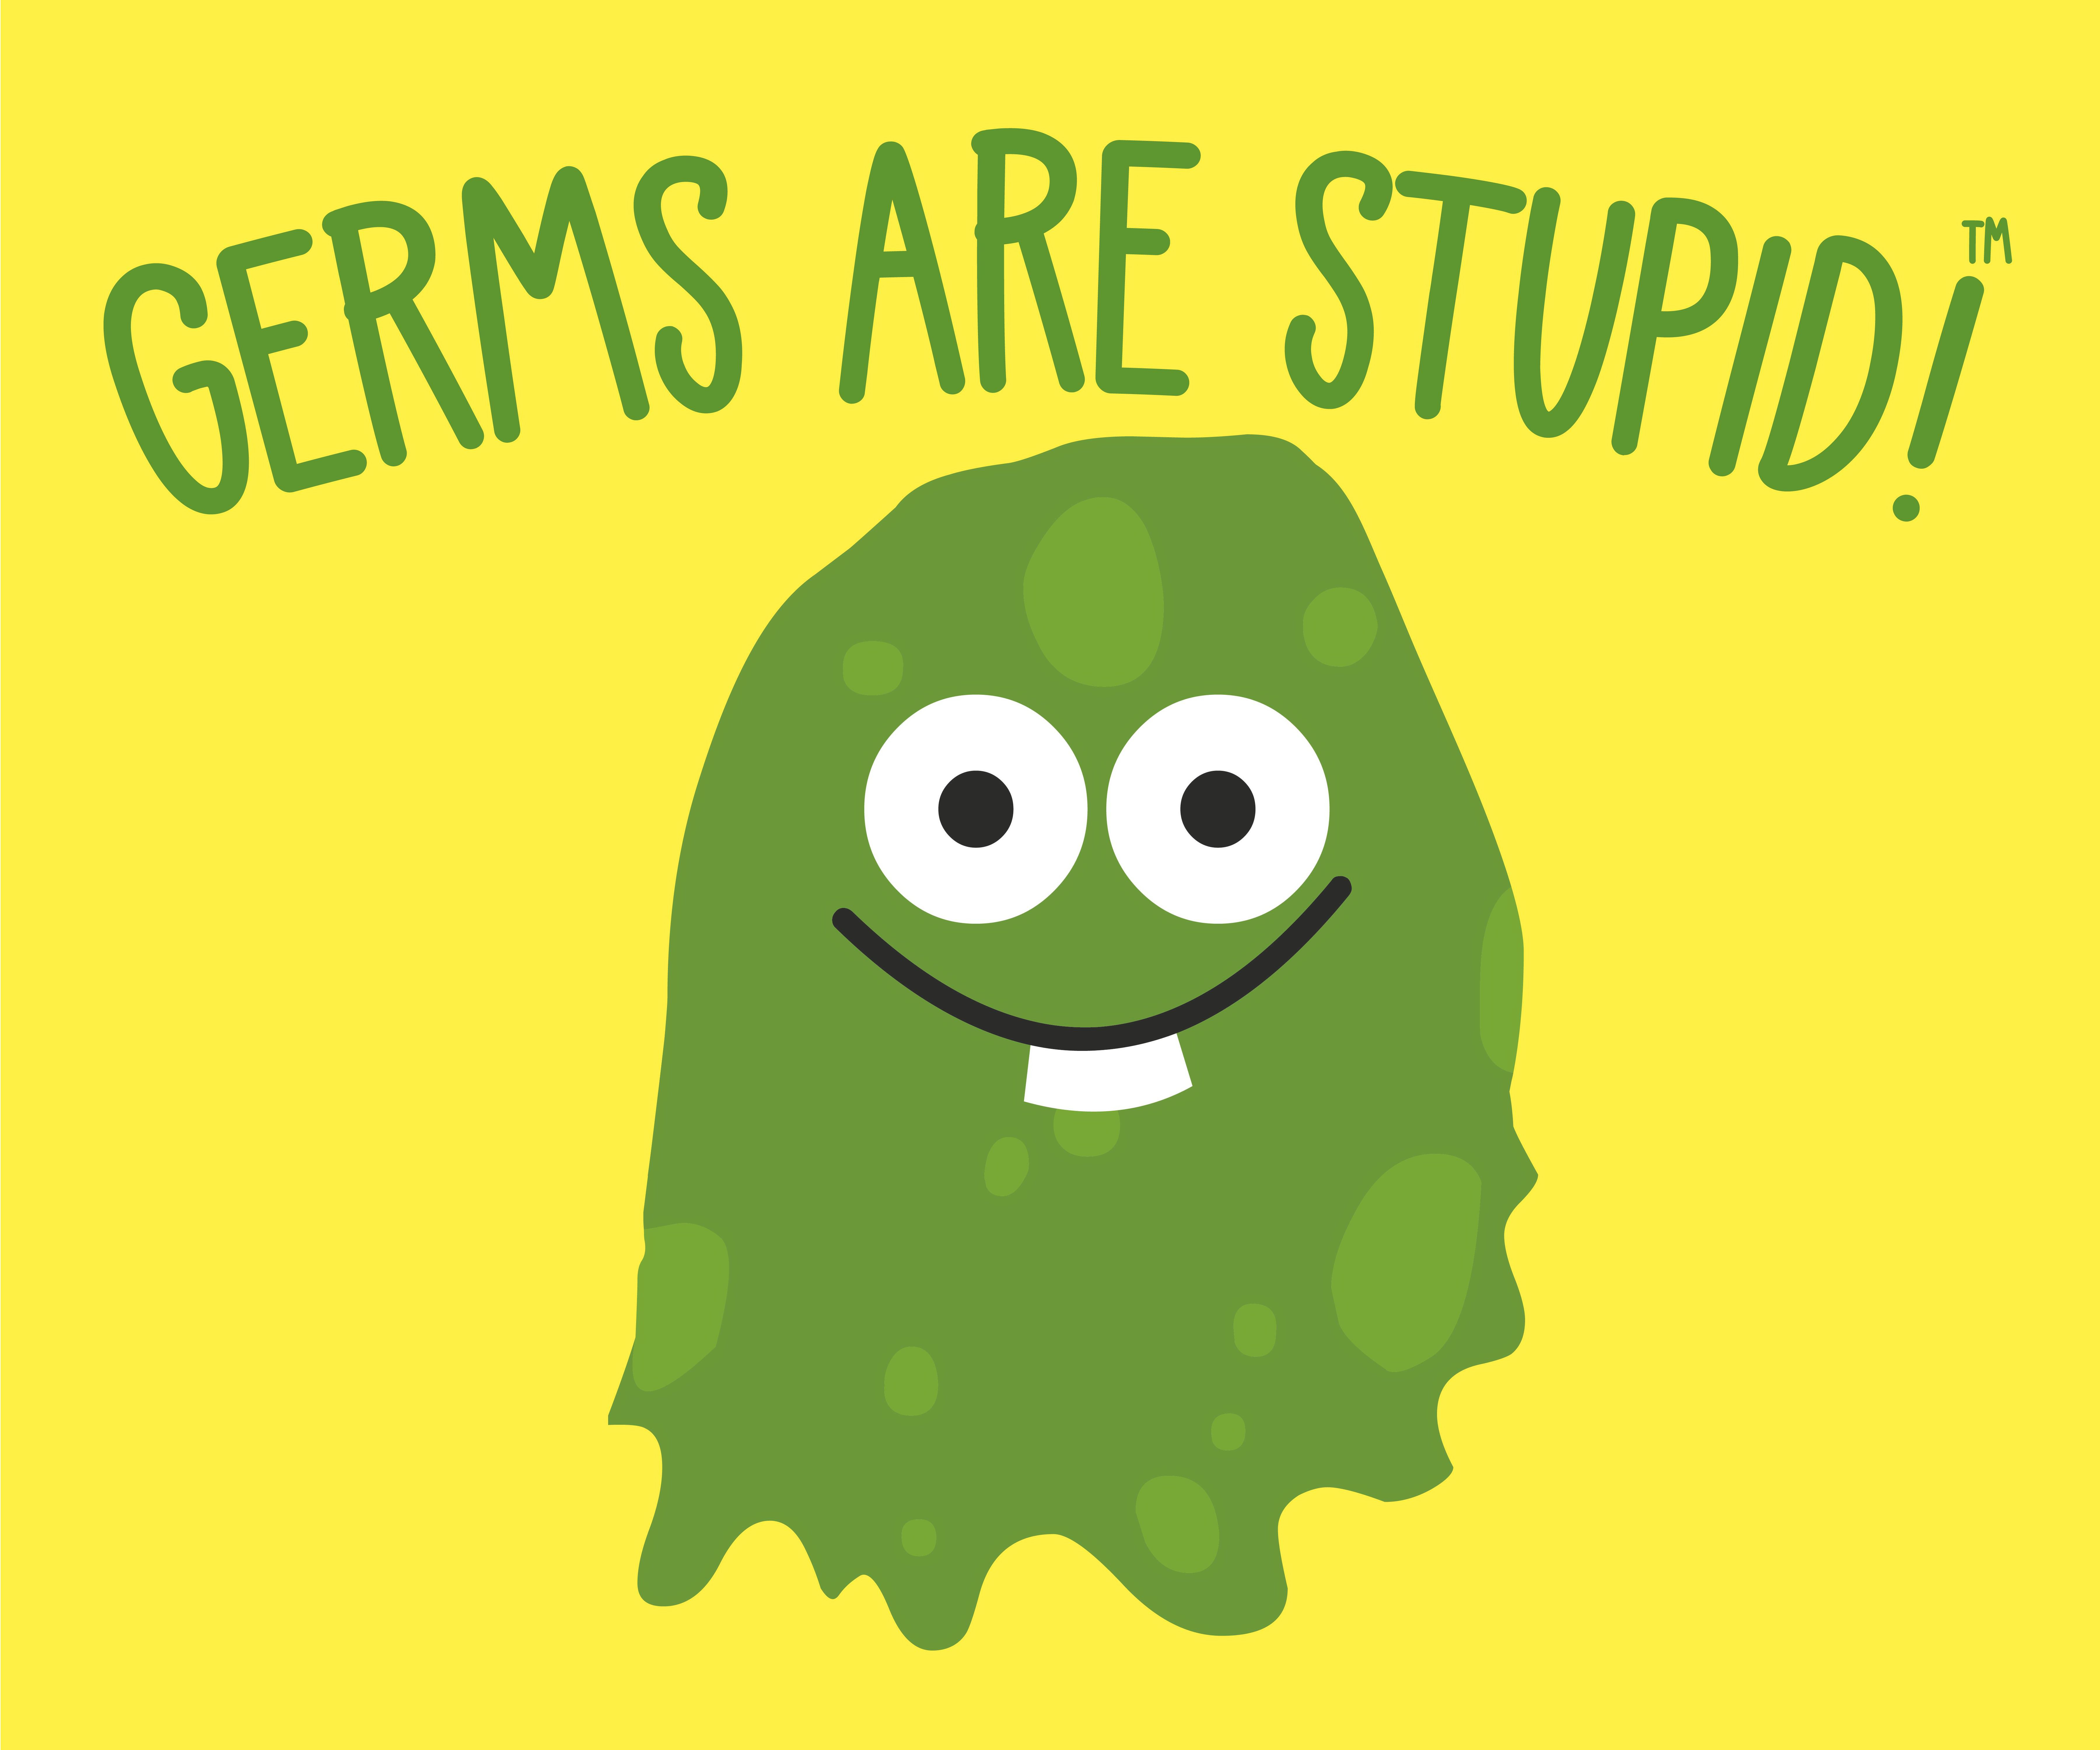  GERMS ARE STUPID!